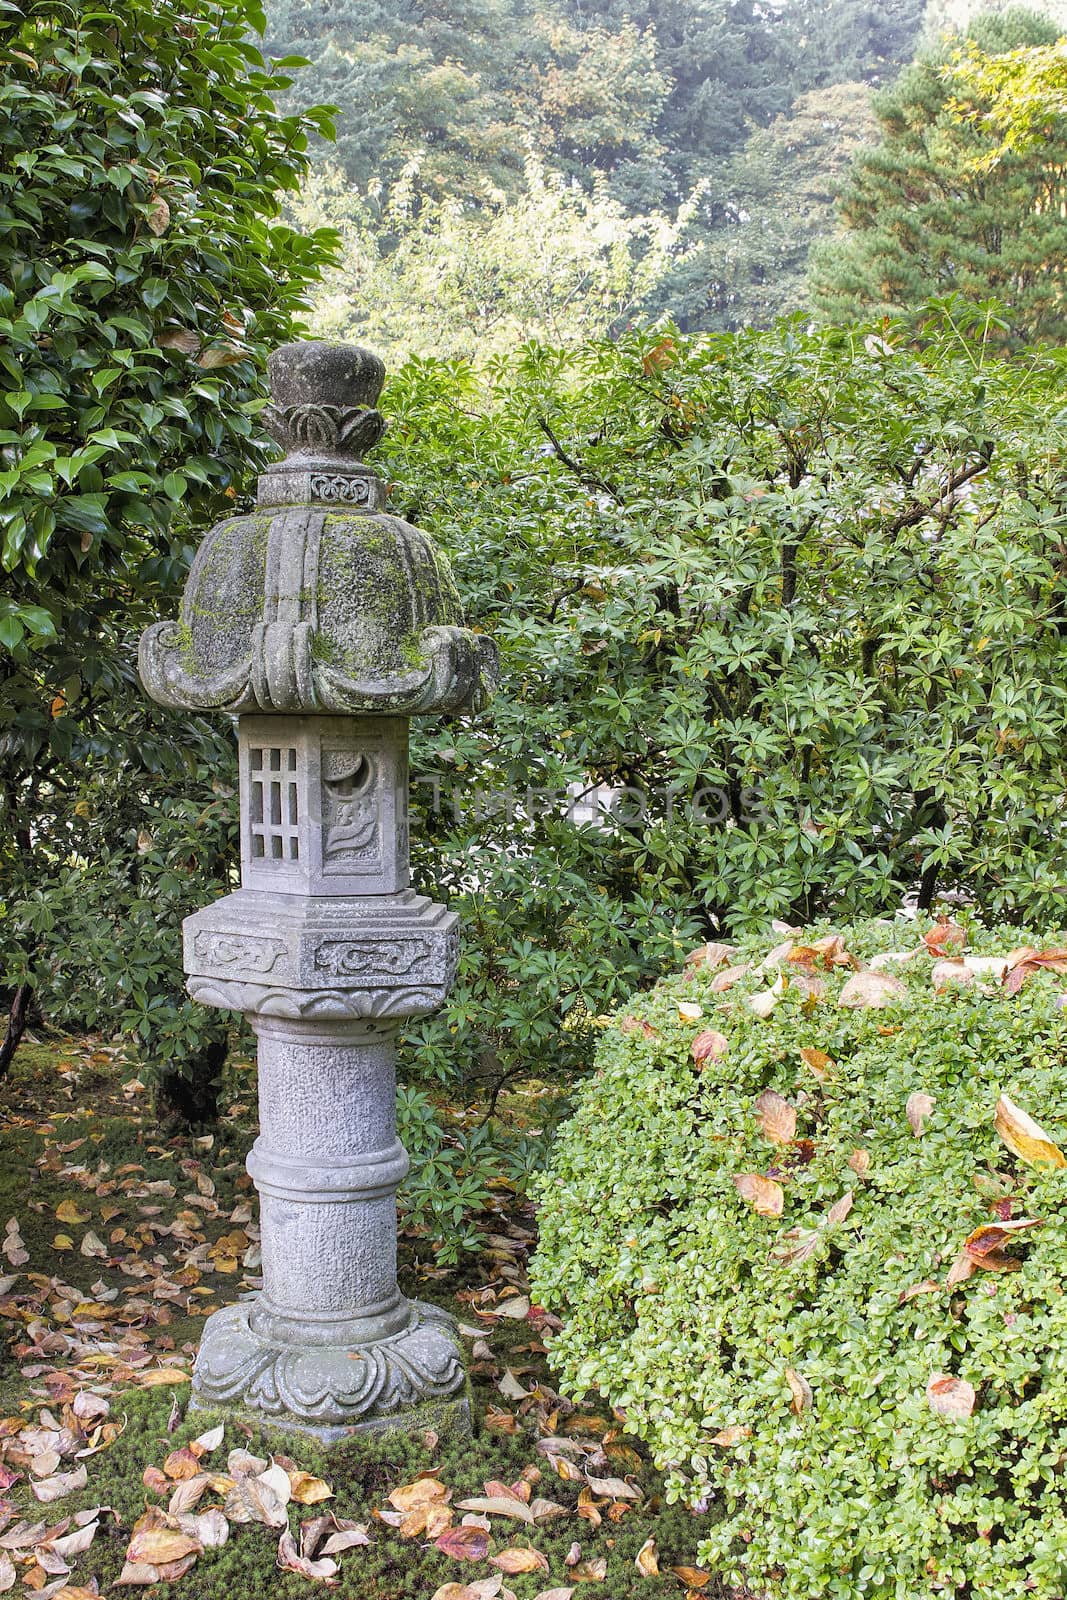 Japanese Stone Lantern in Garden with Plants and Shrubs during Fall Season